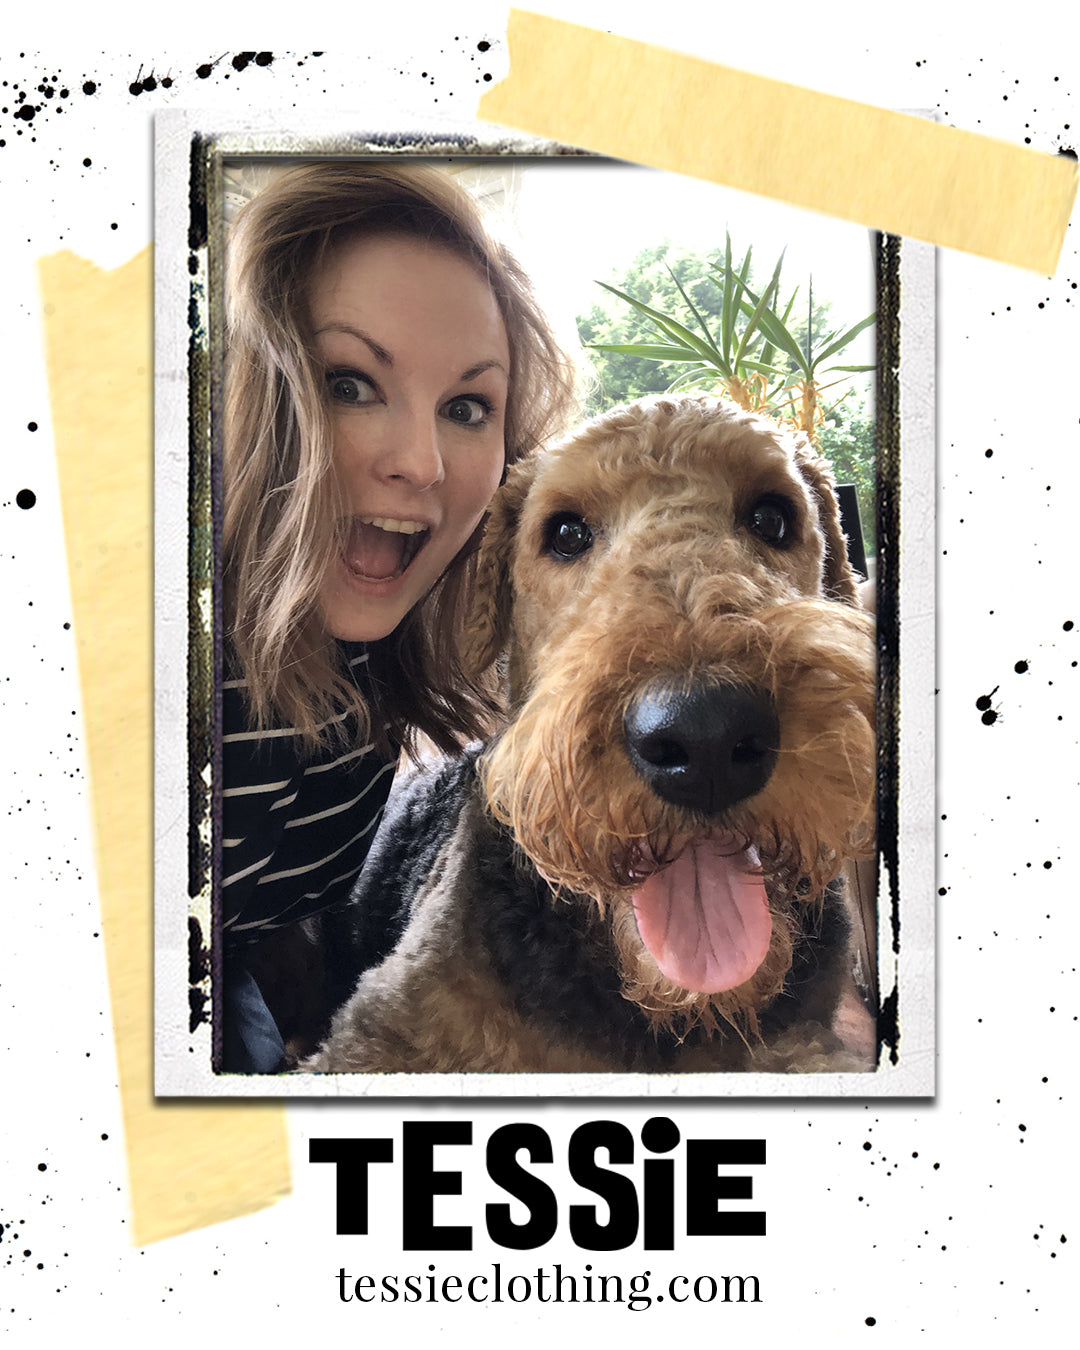 Tessie Clothing founder Georgina with Poppy the Airedale Terrier